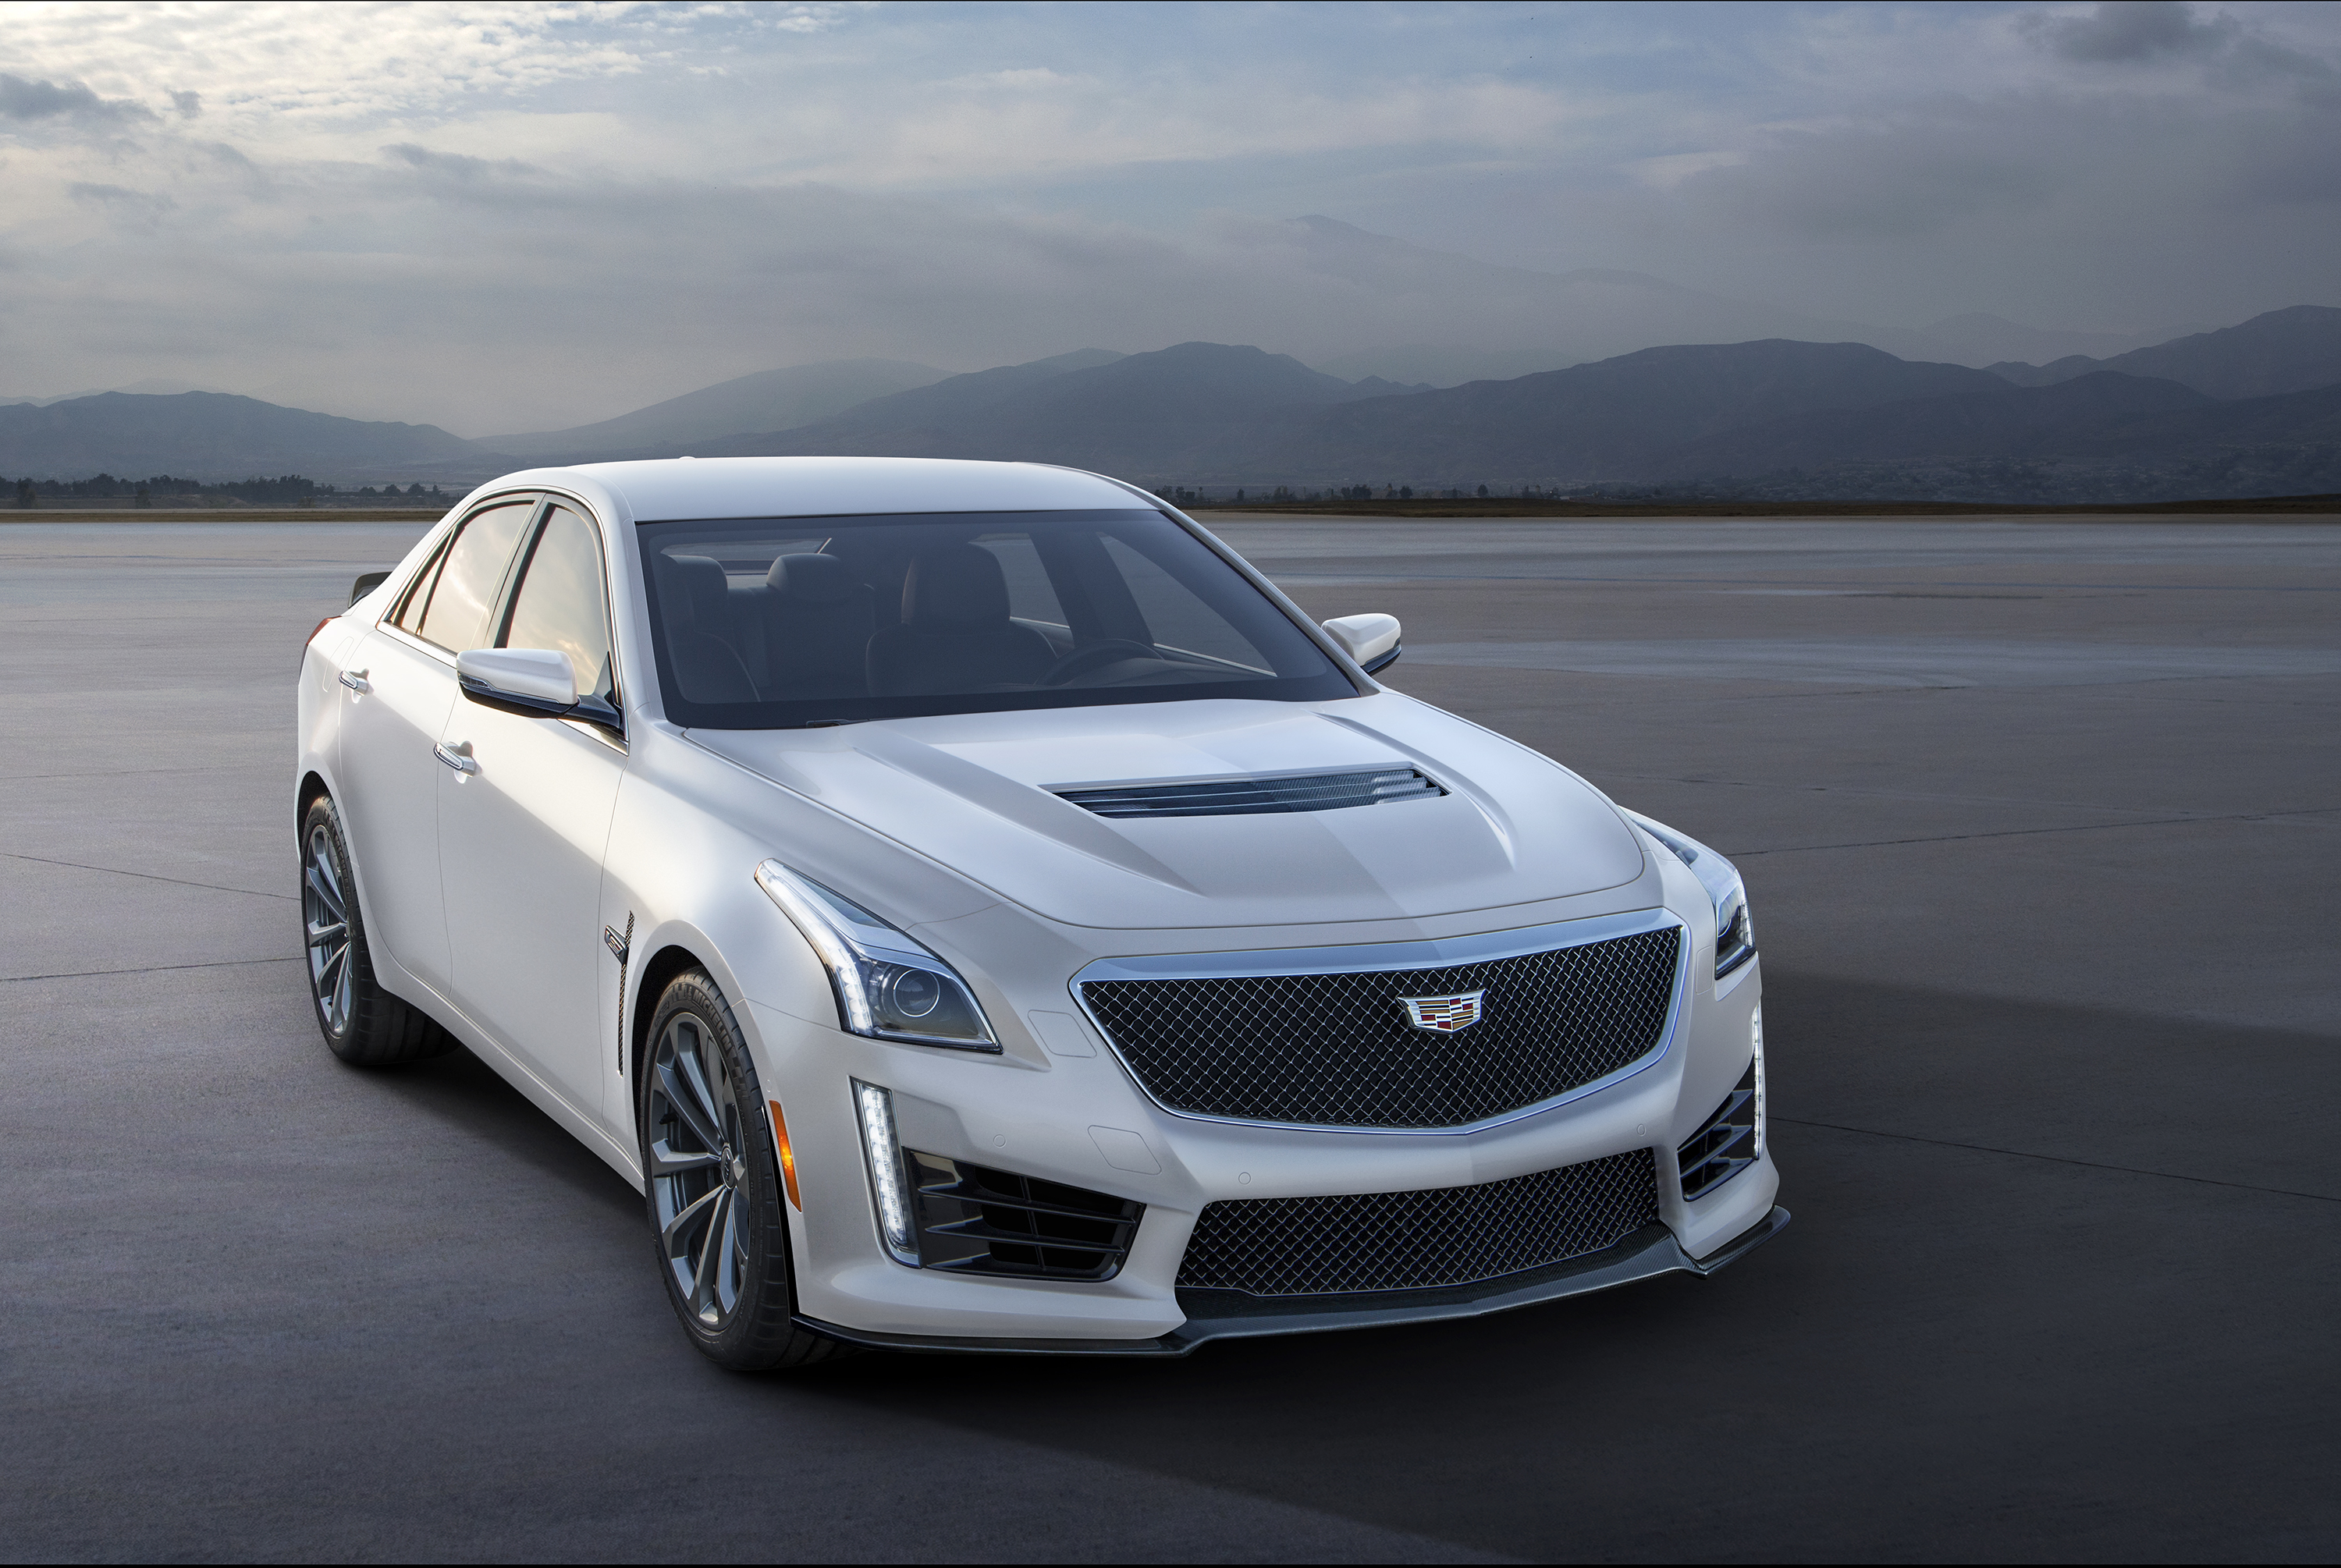 2016 Cadillac V-Series Crystal White Frost Editions